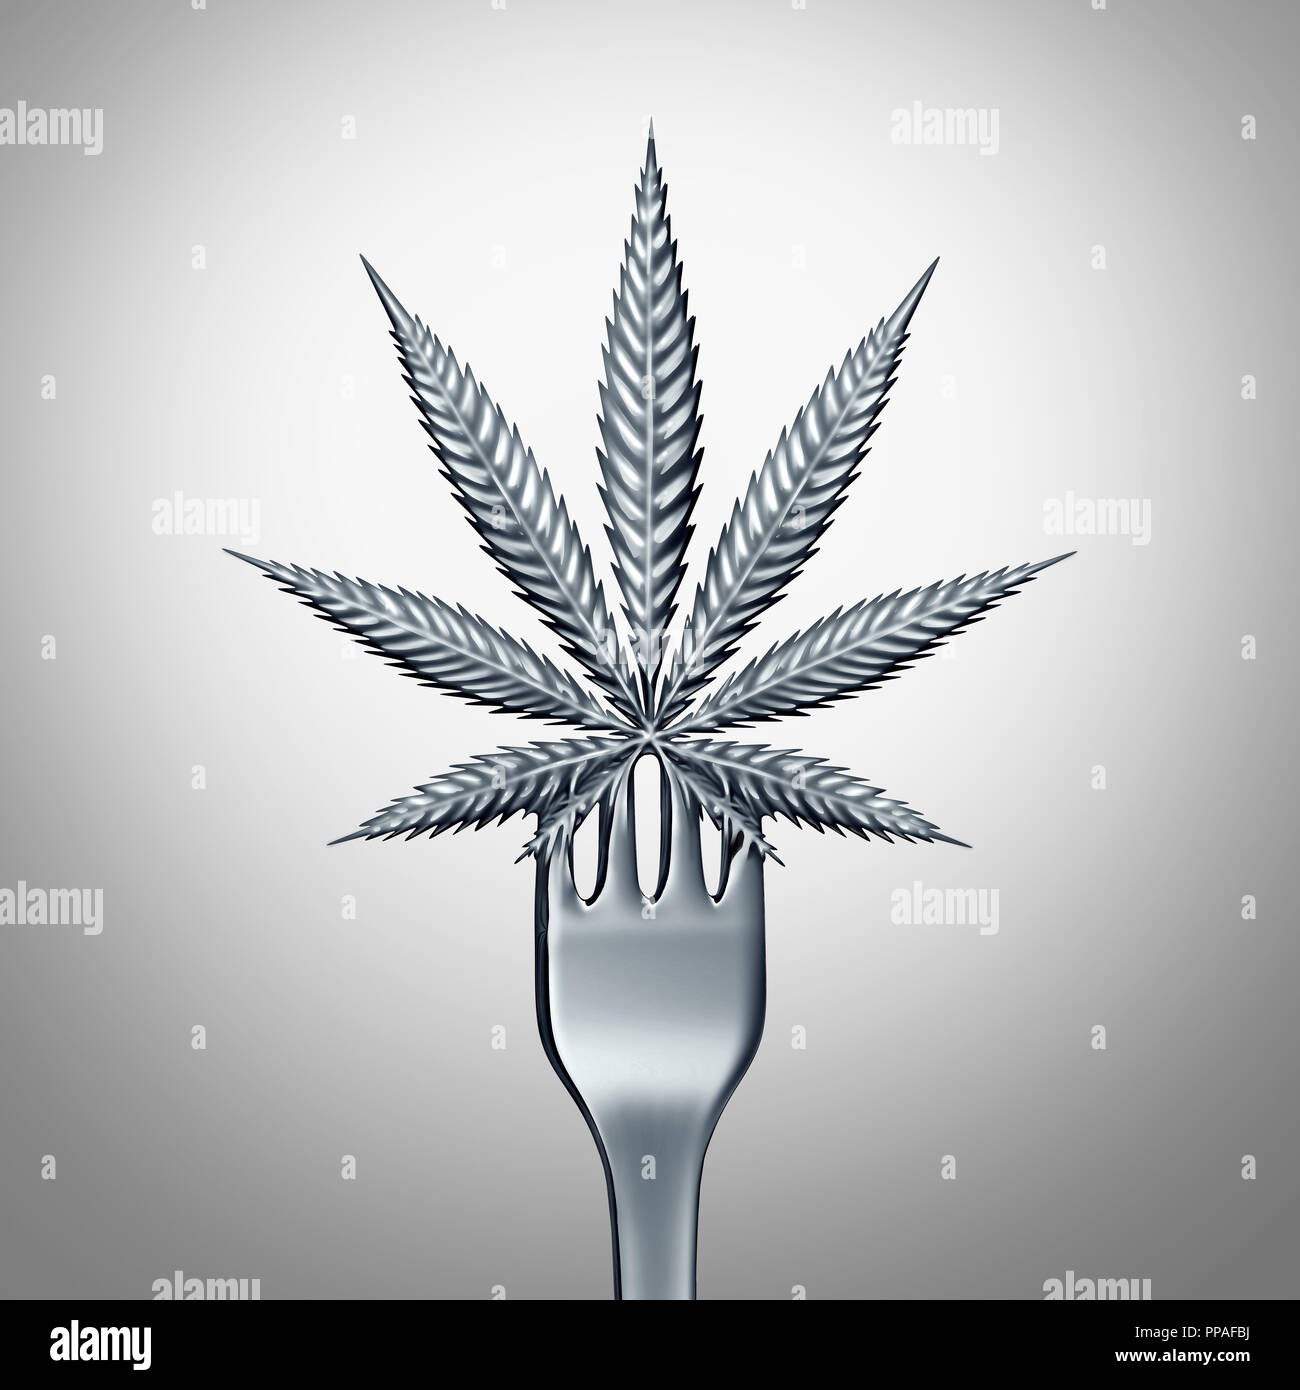 Marijuana food and cannabis edibles or edible munchies concept as a dinner fork with a leaf representing hemp herbal food with psychoactive. Stock Photo